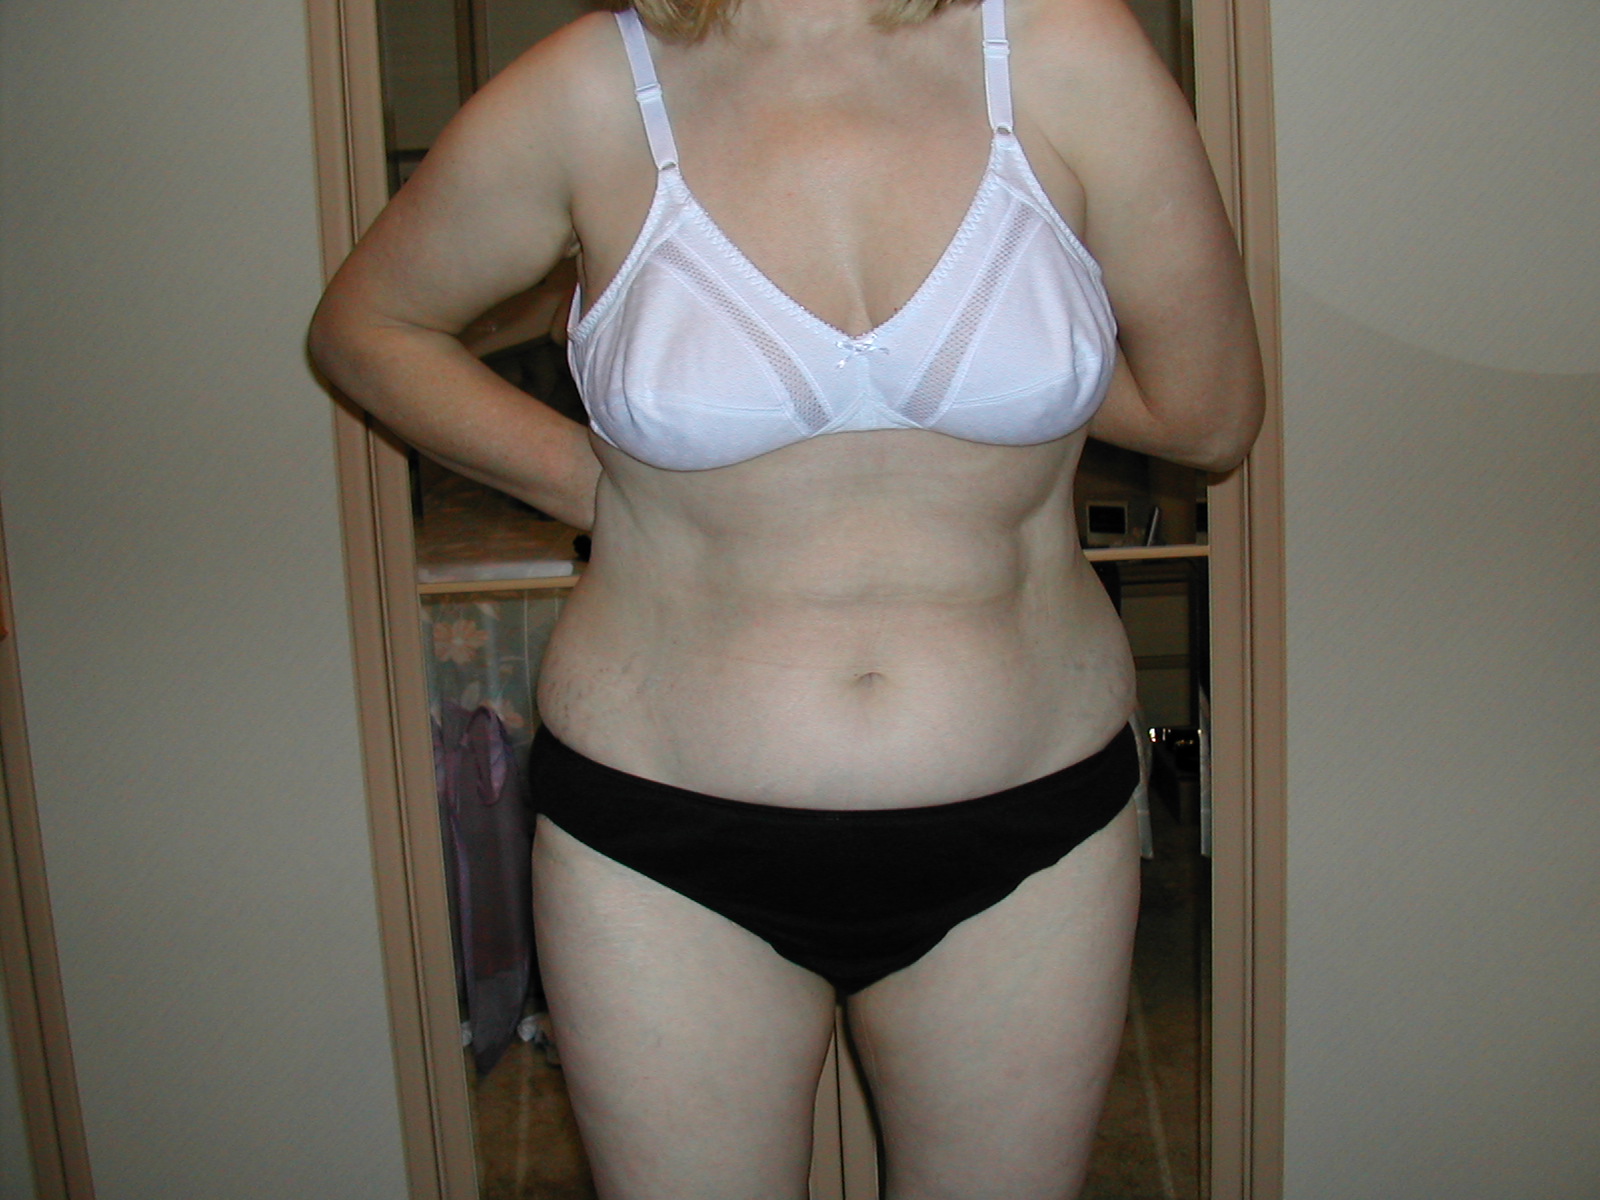 Wife in black knickers and white bra.